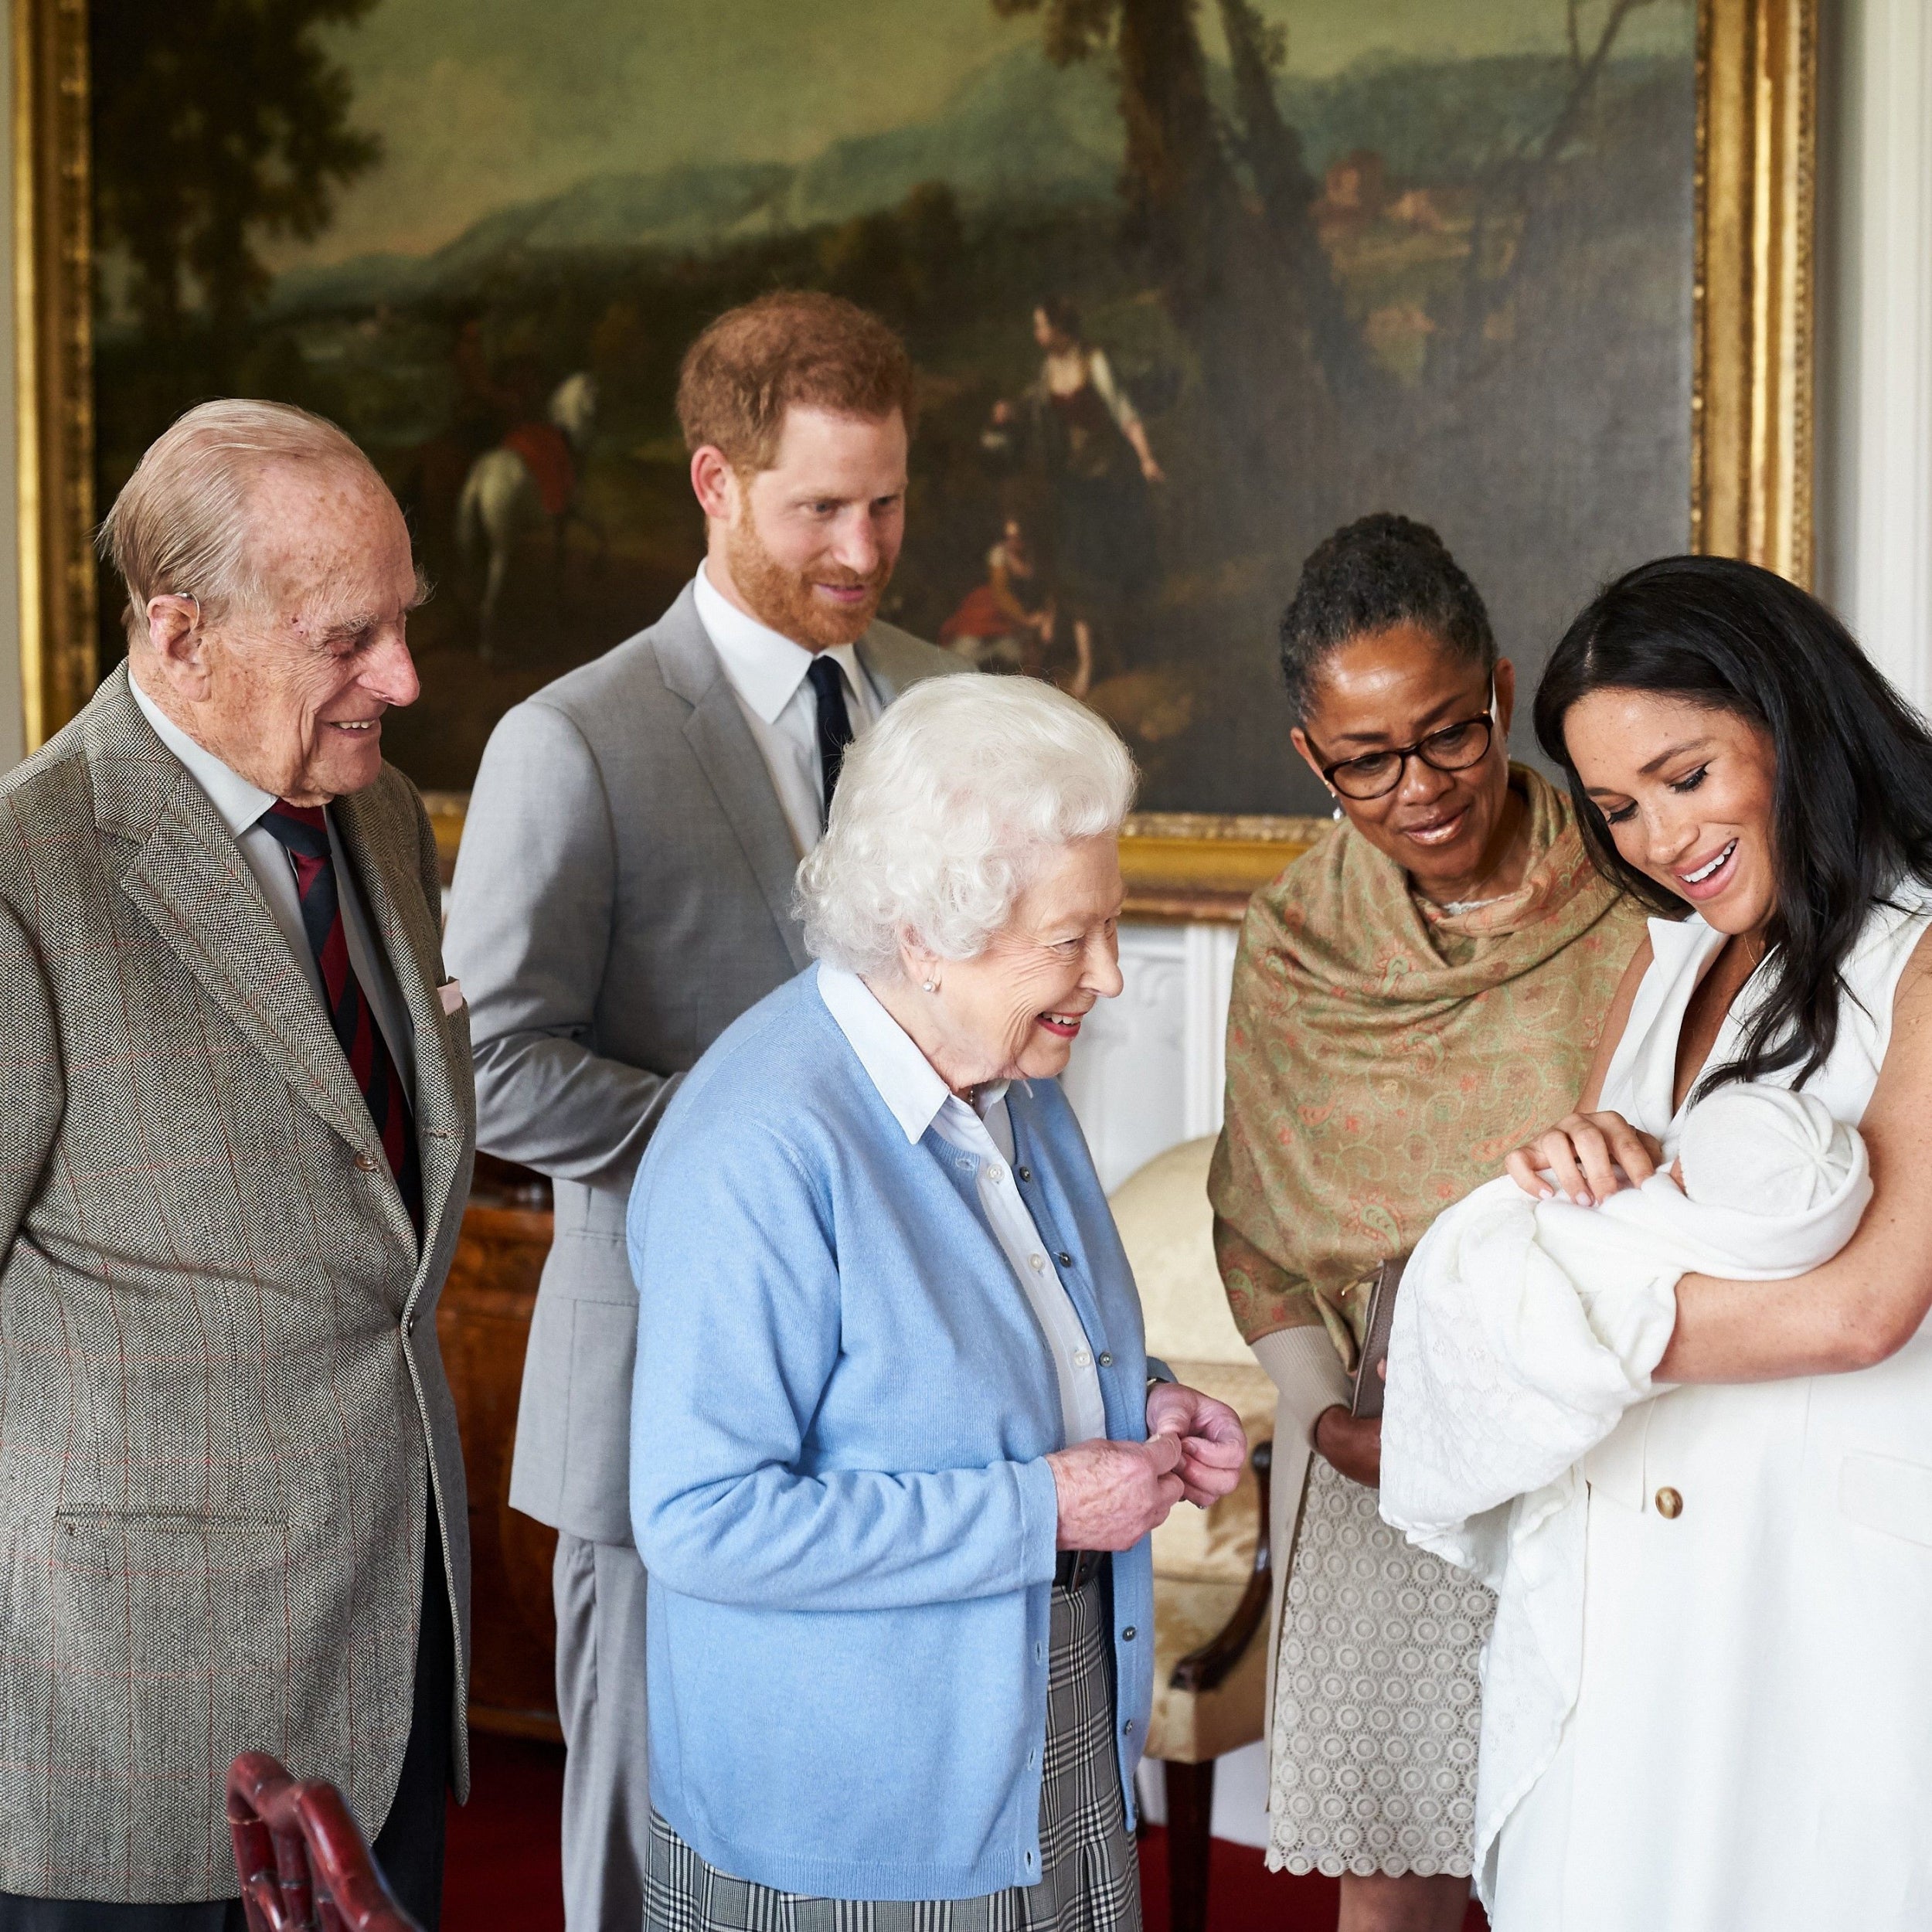 The Duke and Duchess of Sussex are joined by her mother, Doria Ragland, as they show their new son, Archie Harrison Mountbatten-Windsor, to the Queen Elizabeth II and the Duke of Edinburgh at Windsor Castle in May, 2019